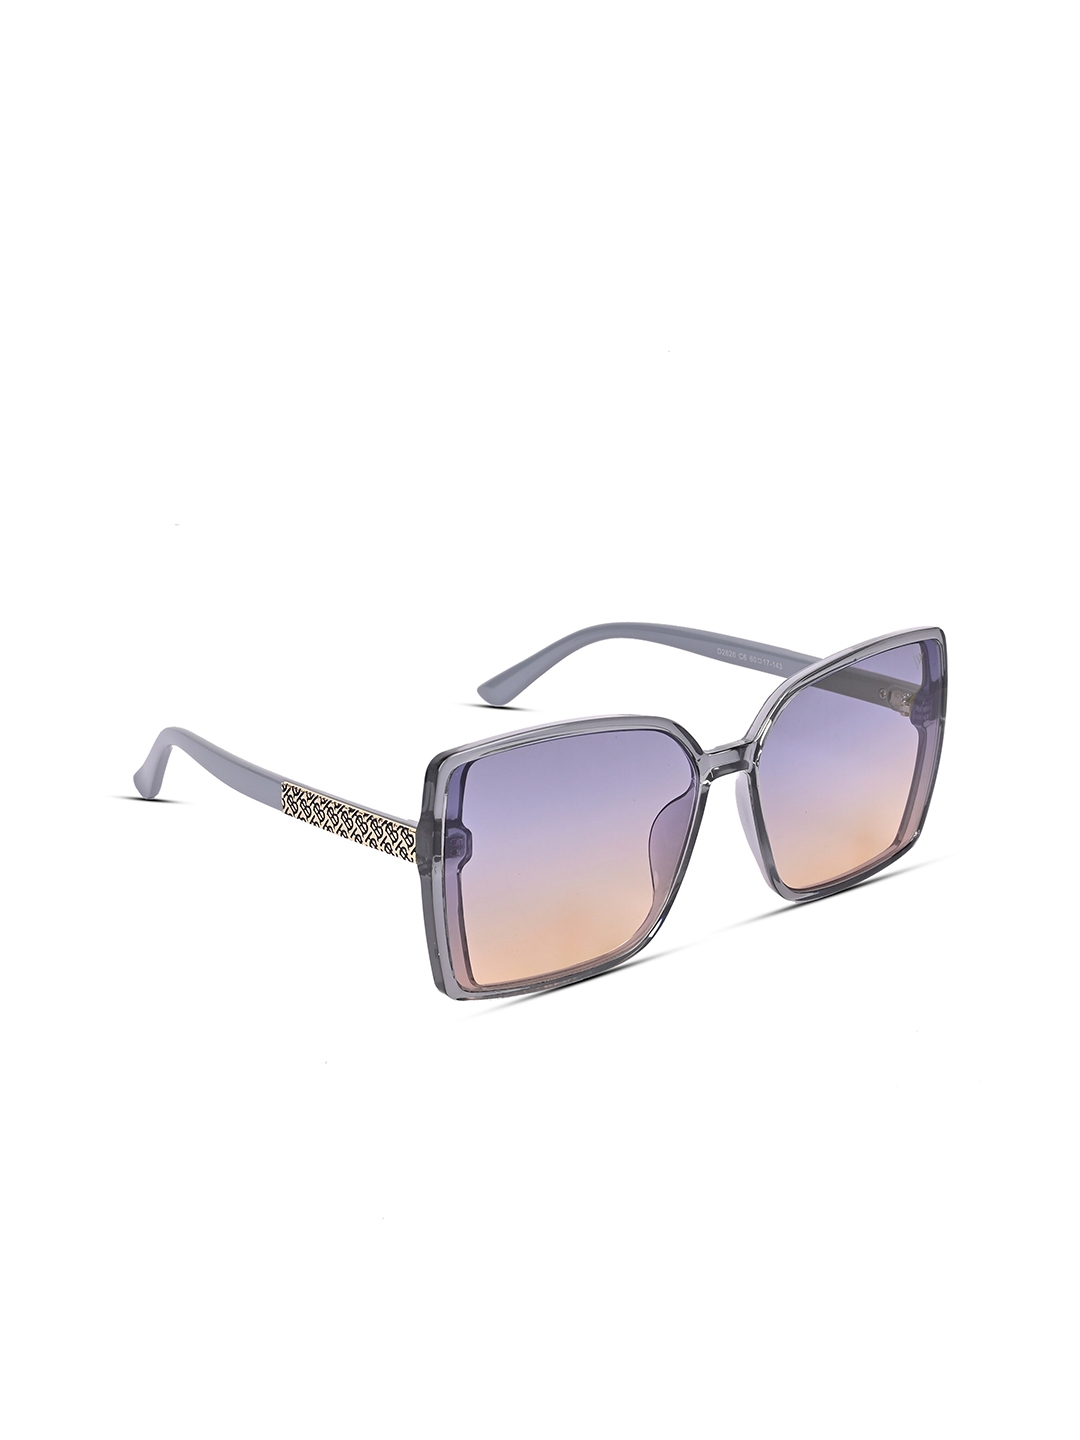 Buy Voyage Women Purple Lens And Gunmetal Toned Square Sunglasses With Uv Protected Lens